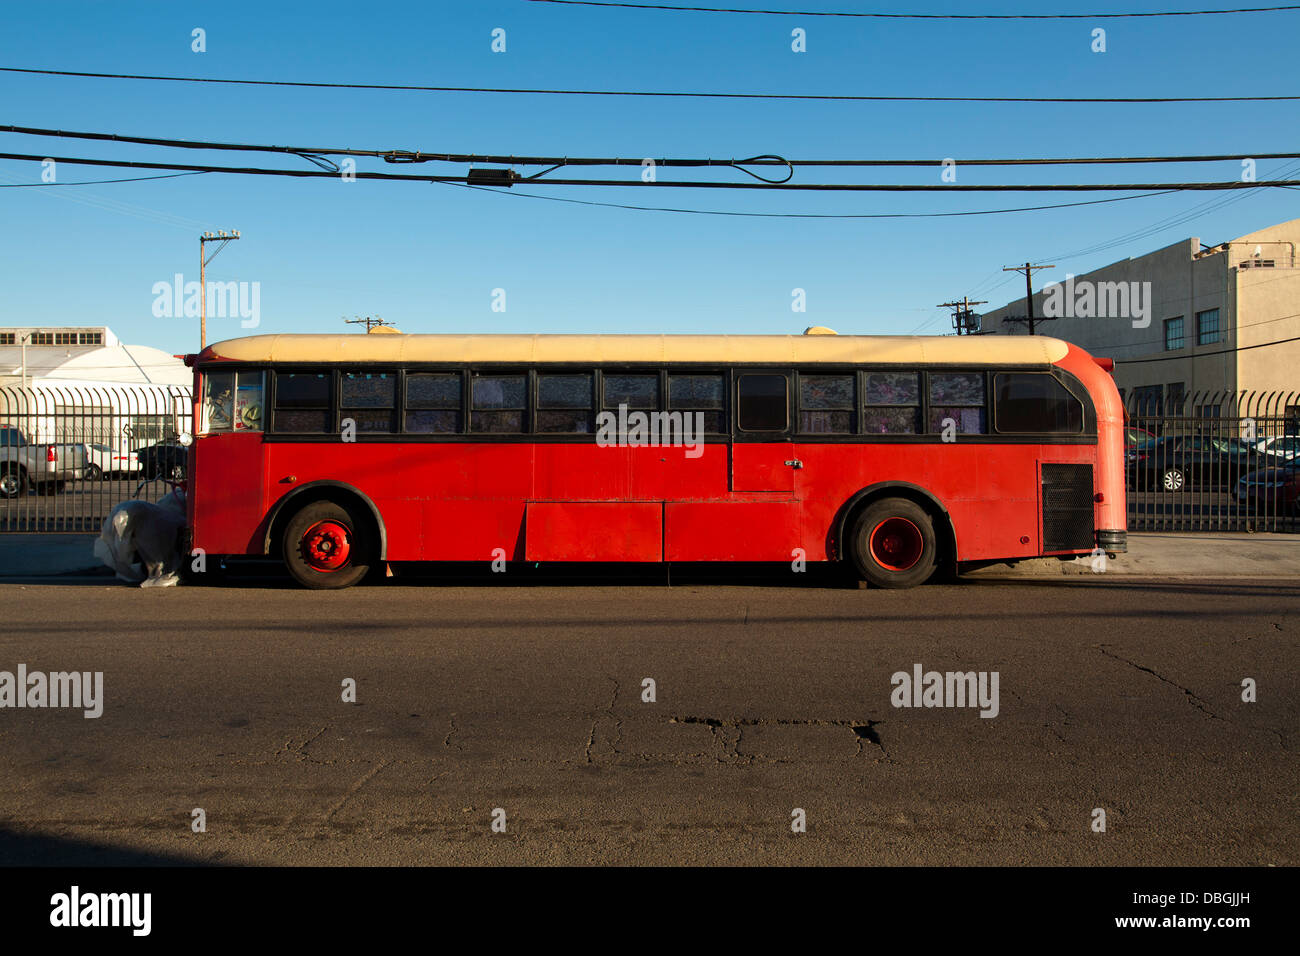 Red Bus, Los Angeles, California, United States of America Stock Photo